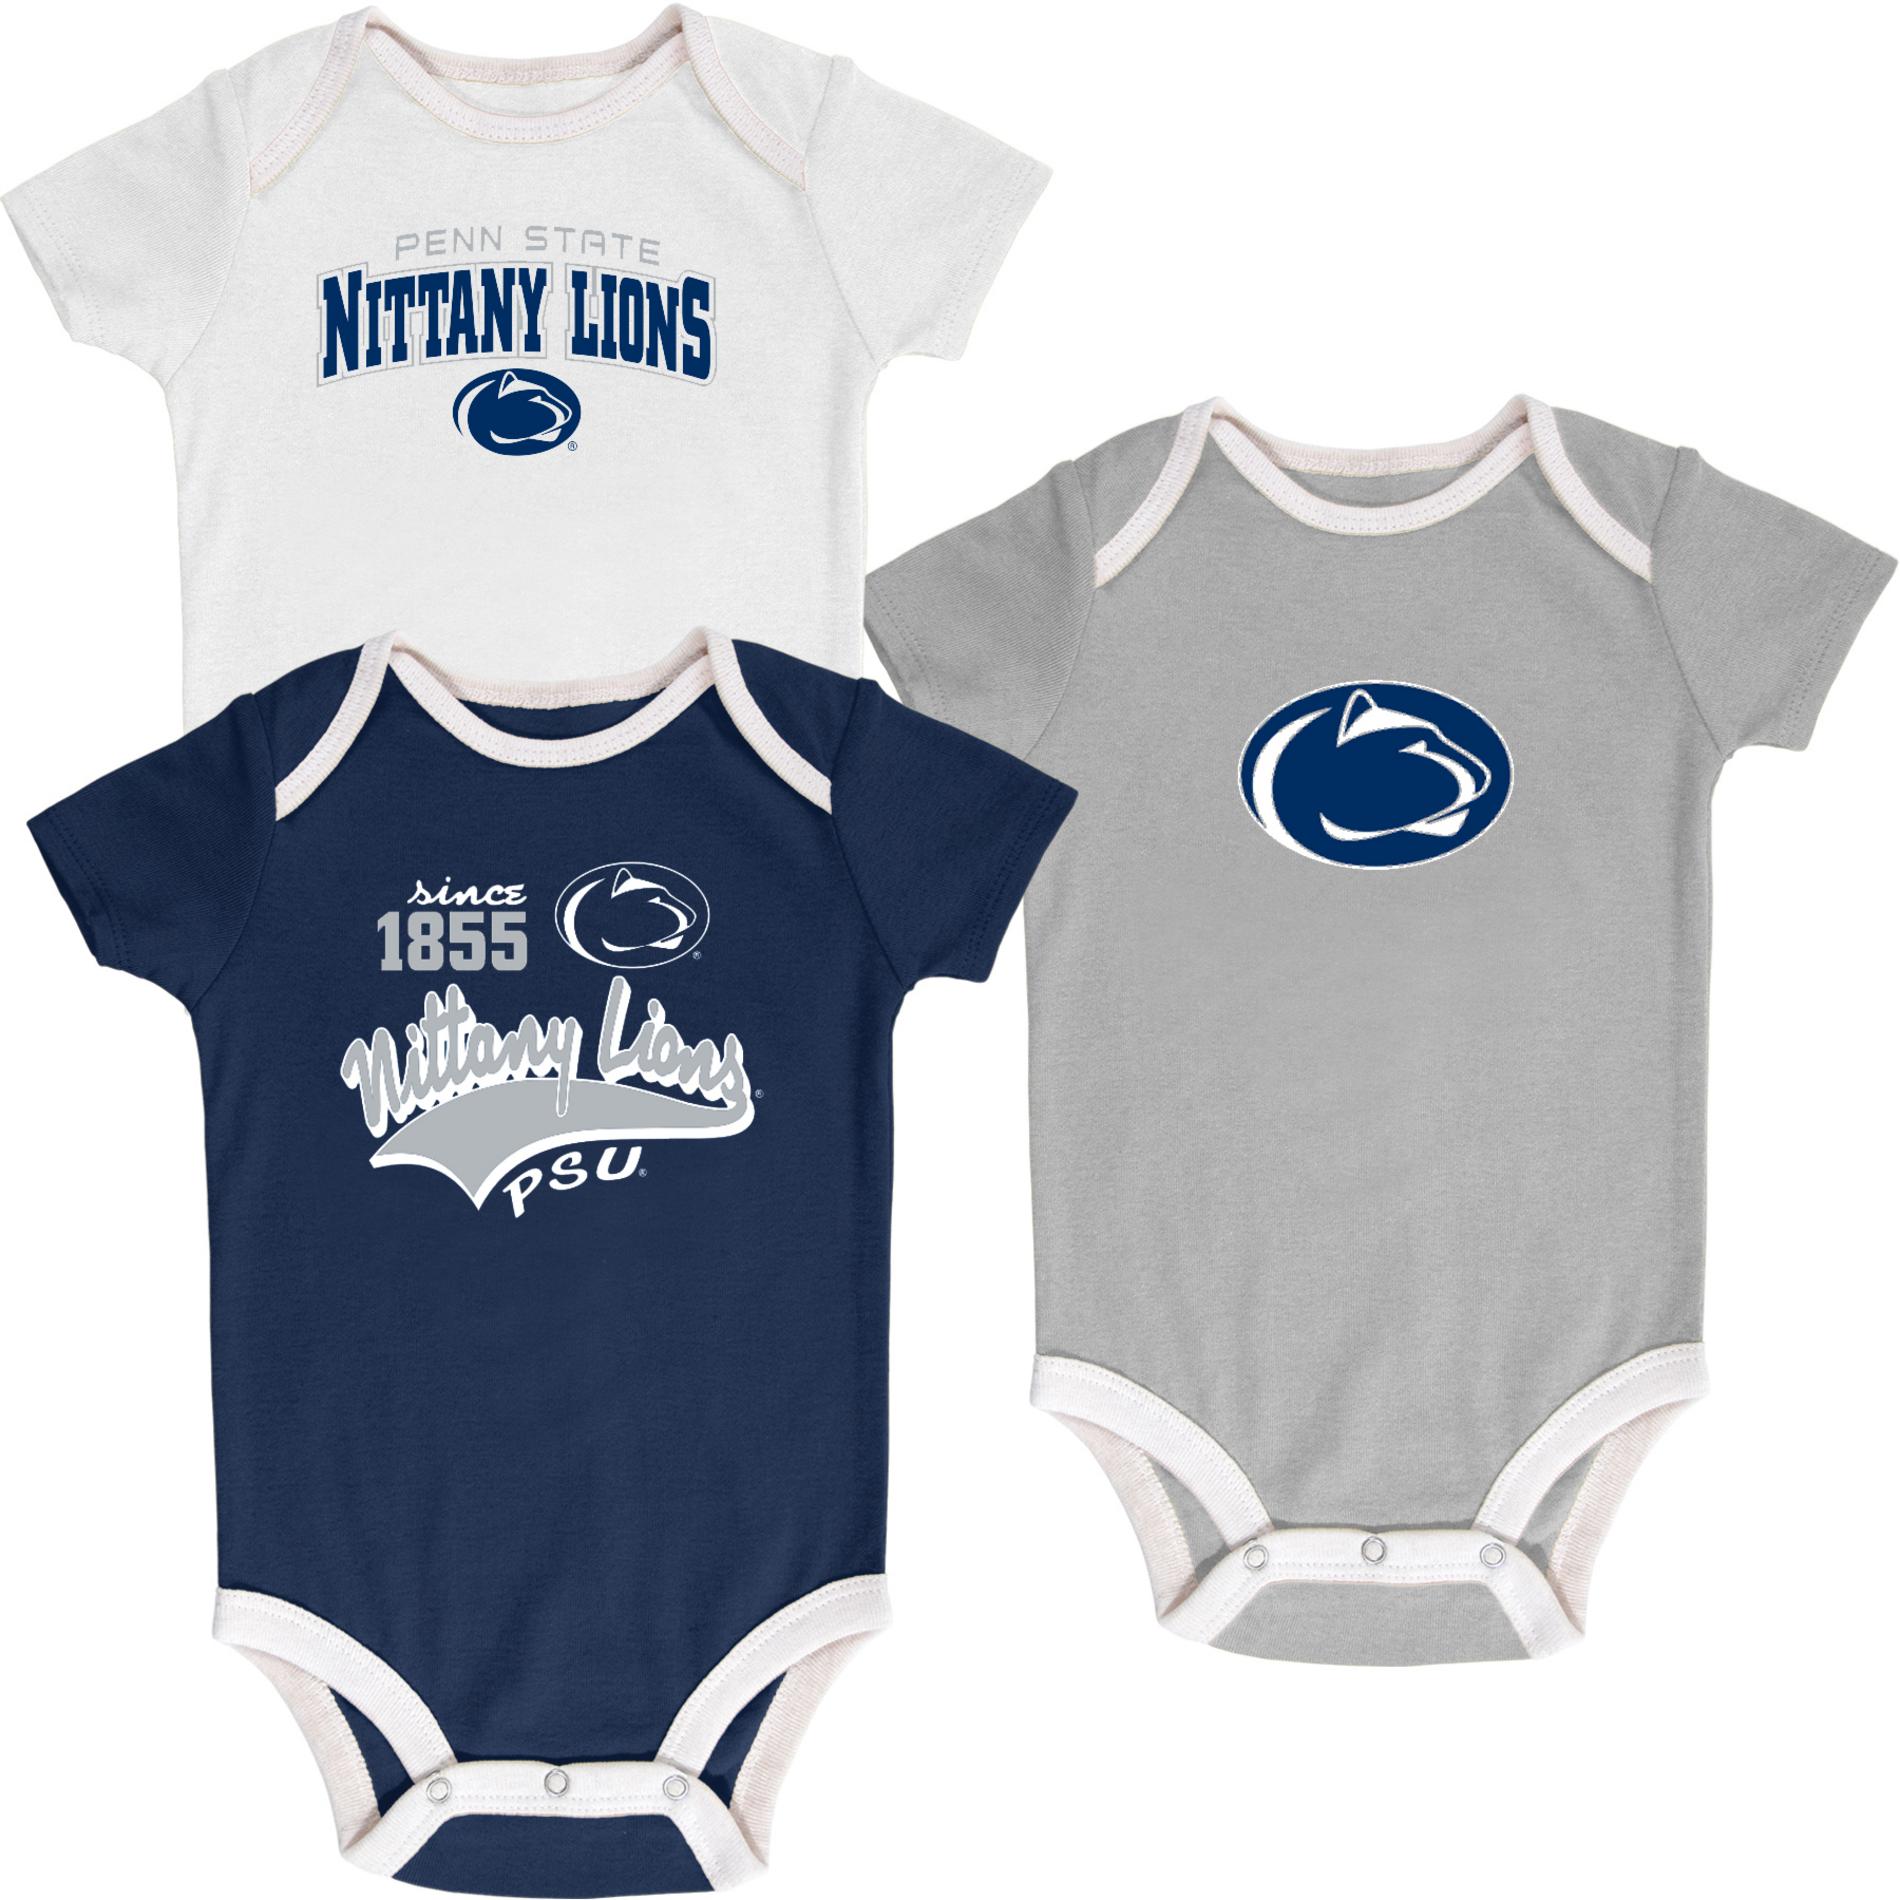 NCAA Newborn & Infants' 3-Pack Graphic Bodysuits - Penn State Nittany Lions